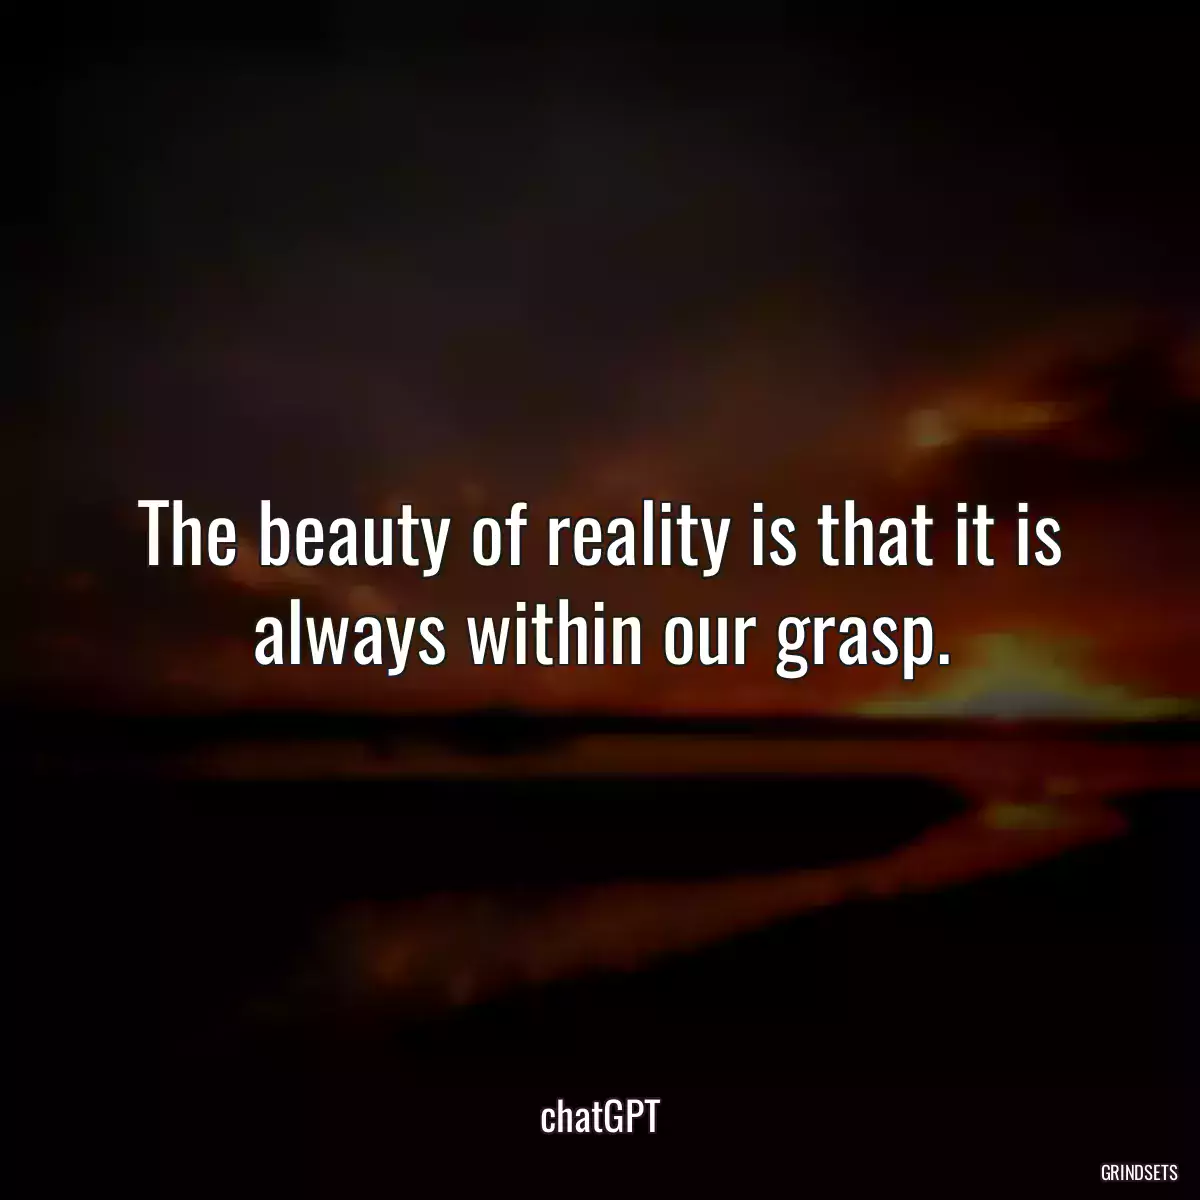 The beauty of reality is that it is always within our grasp.